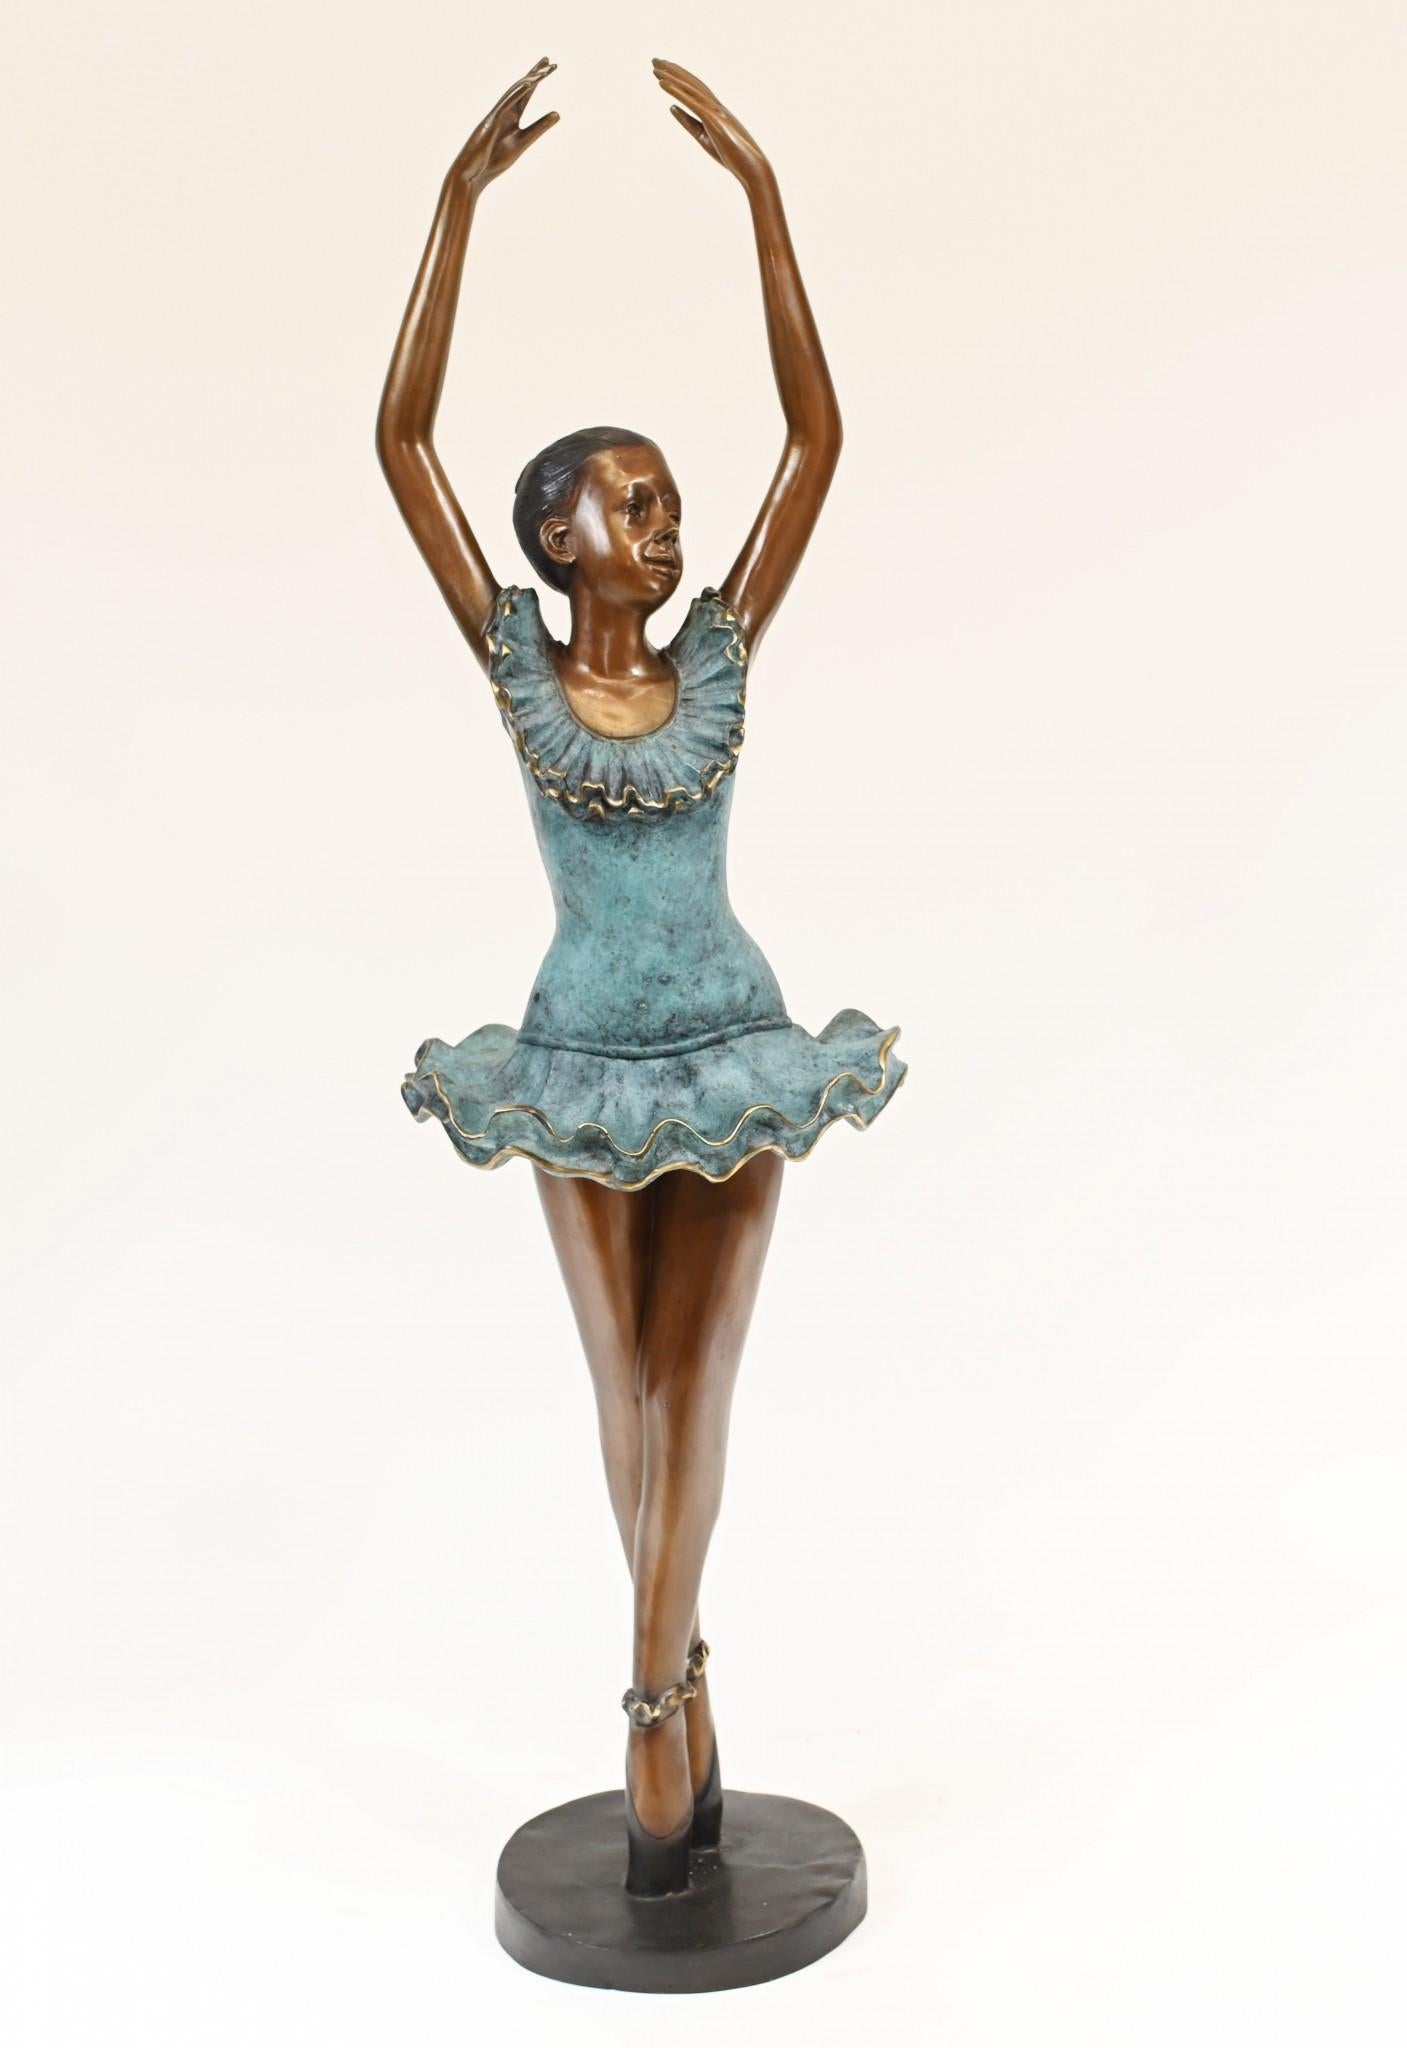 Cute bronze statue of a young ballerina in pirouette mode
Such a joyful piece, will add exuberance to any interior
Bought from a dealer on Marche Biron at Paris antiques markets
Some of our items are in storage so please check ahead of a viewing to